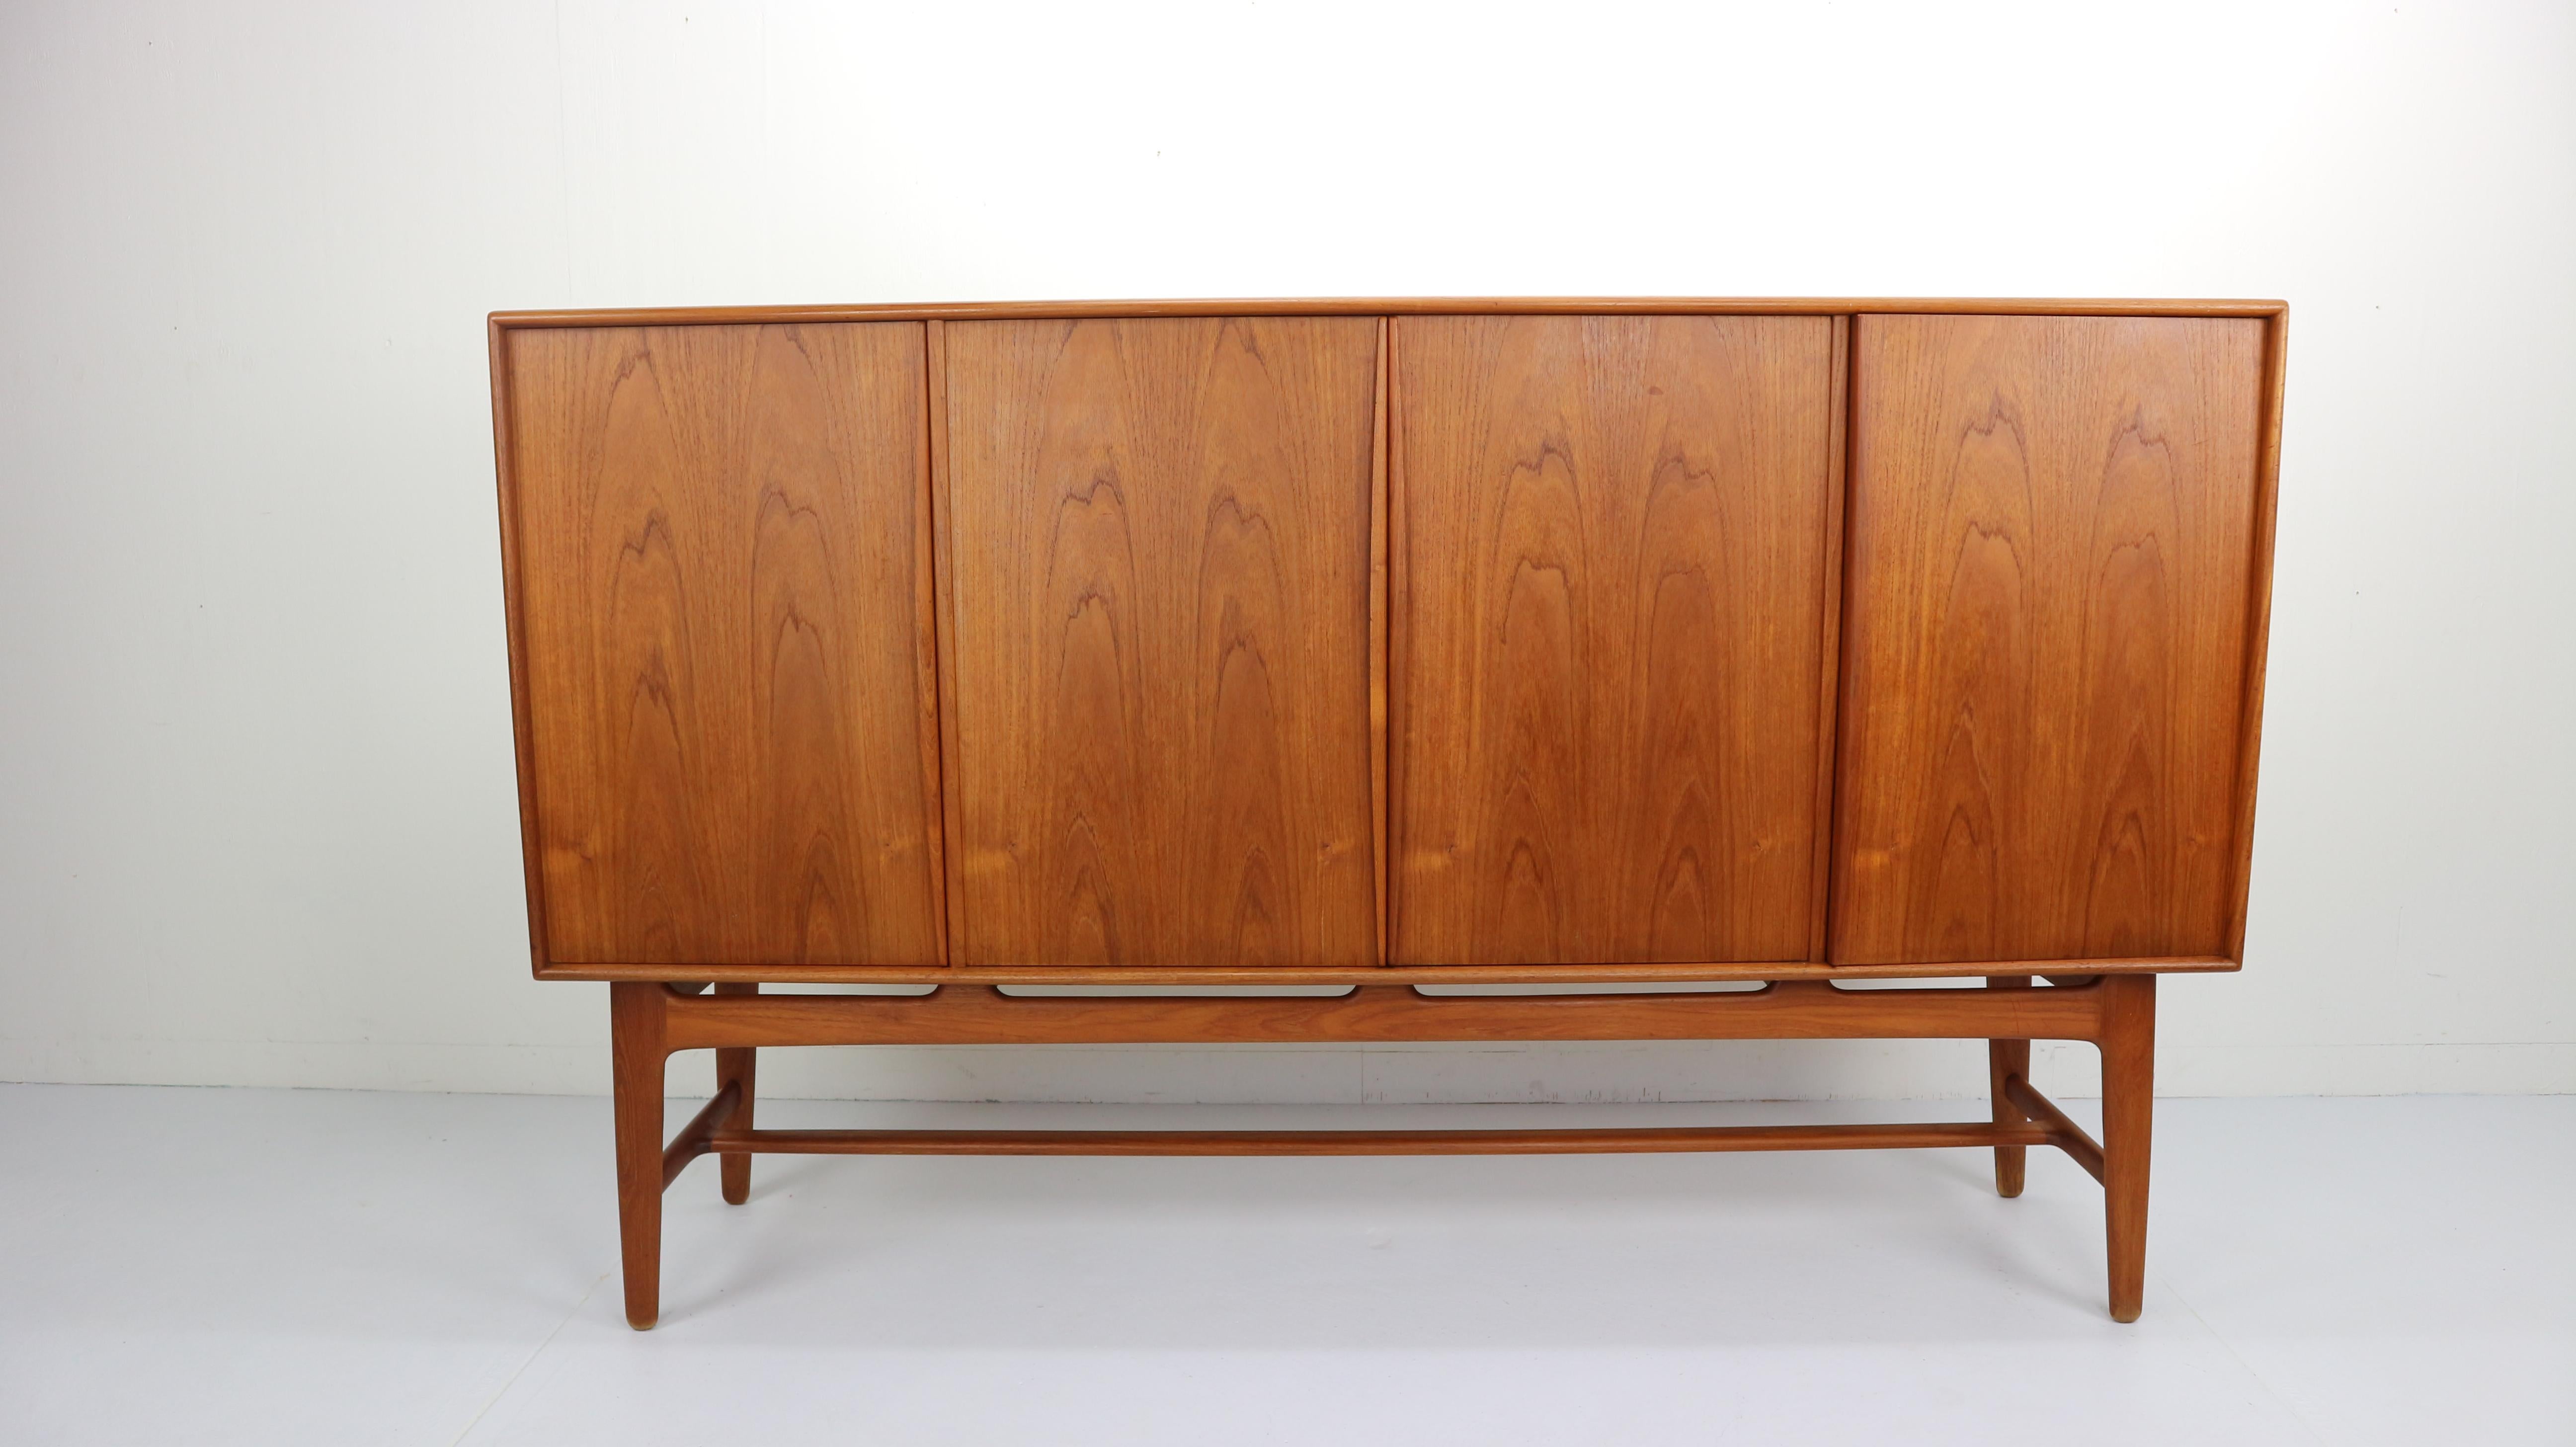 Rare model Danish highboard or cabinet designed by Svend Aage Madsen for K. Knudsen & Son in the 1950s. It's a wonderful solid teak design with organically sculpted grips and elegant curves. The entire interior is finished in teak and looks